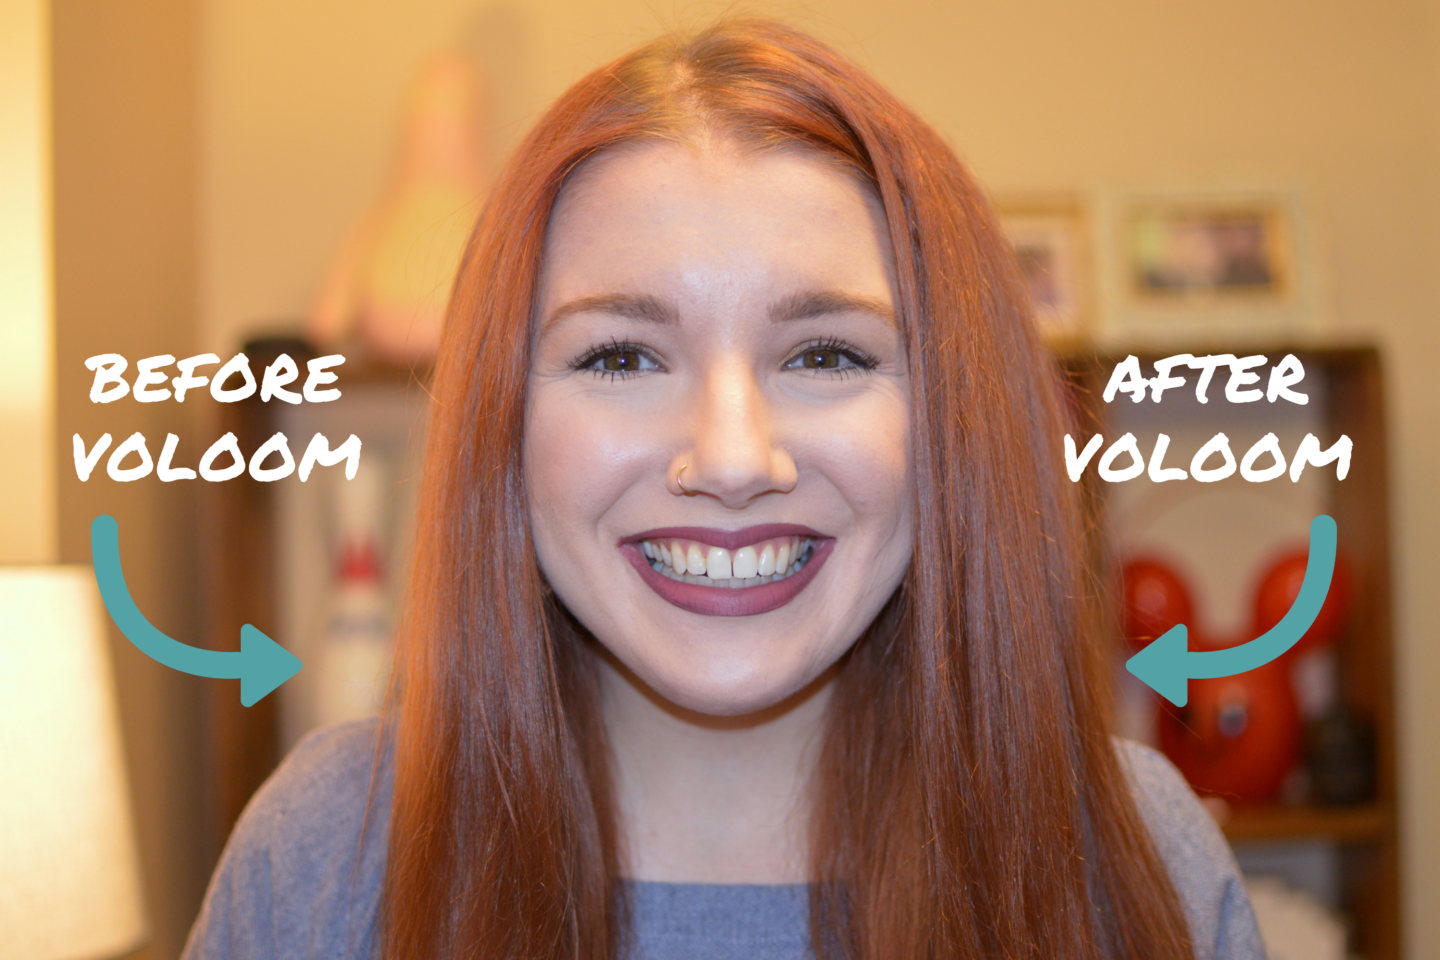 Easy, Big Hair: Review of the Voloom Hair Volume Iron